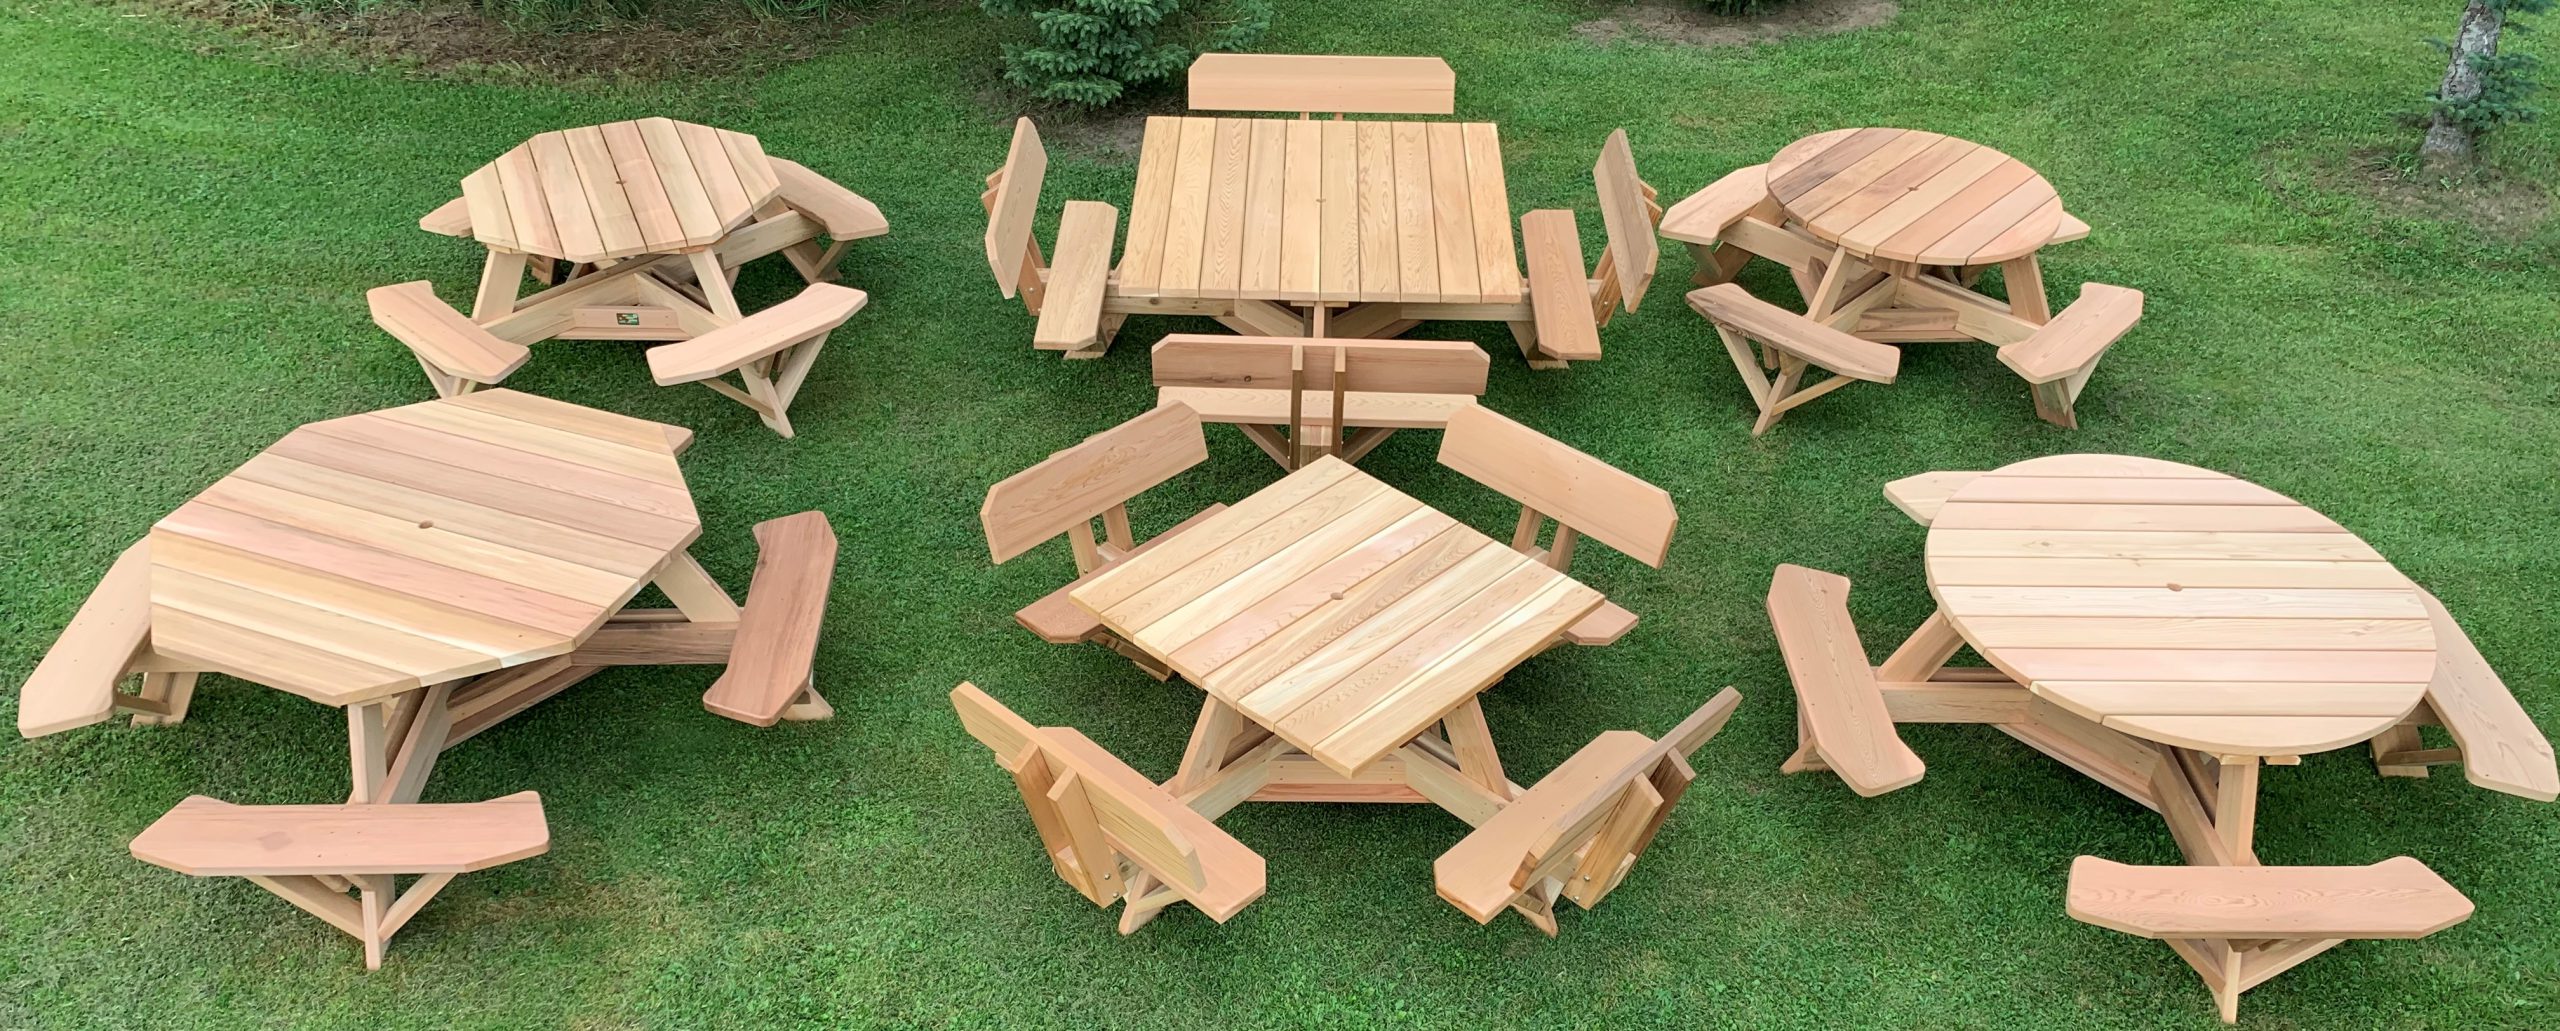 Easy Seating Picnic Table Designs in Western Red Cedar